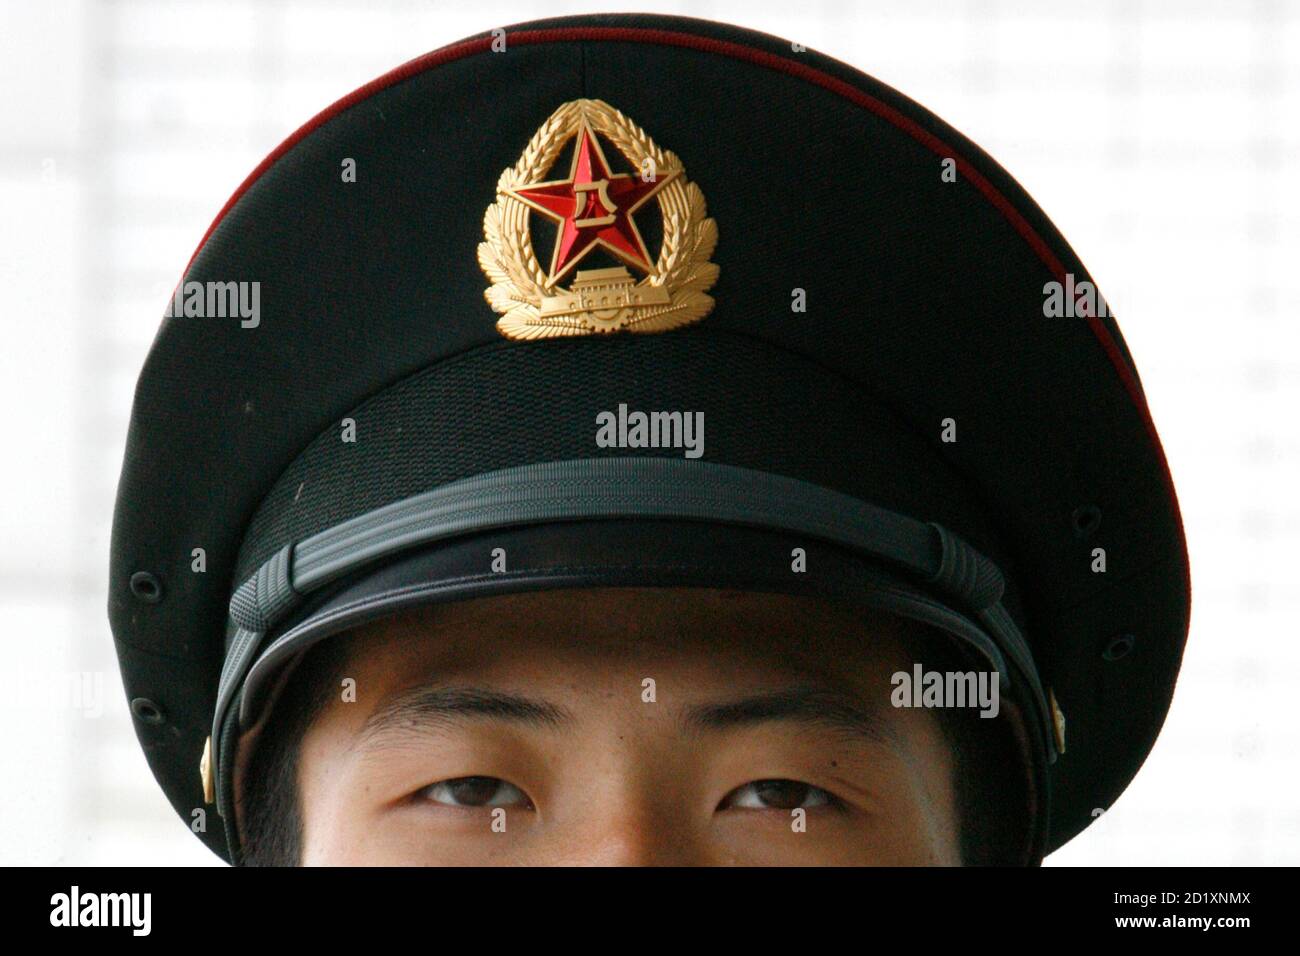 A People's Liberation Army soldier keeps watch during celebrations for the  anniversary of the founding of the Chinese People's Liberation Army (PLA)  at a military camp in Beijing August 1, 2008. Among